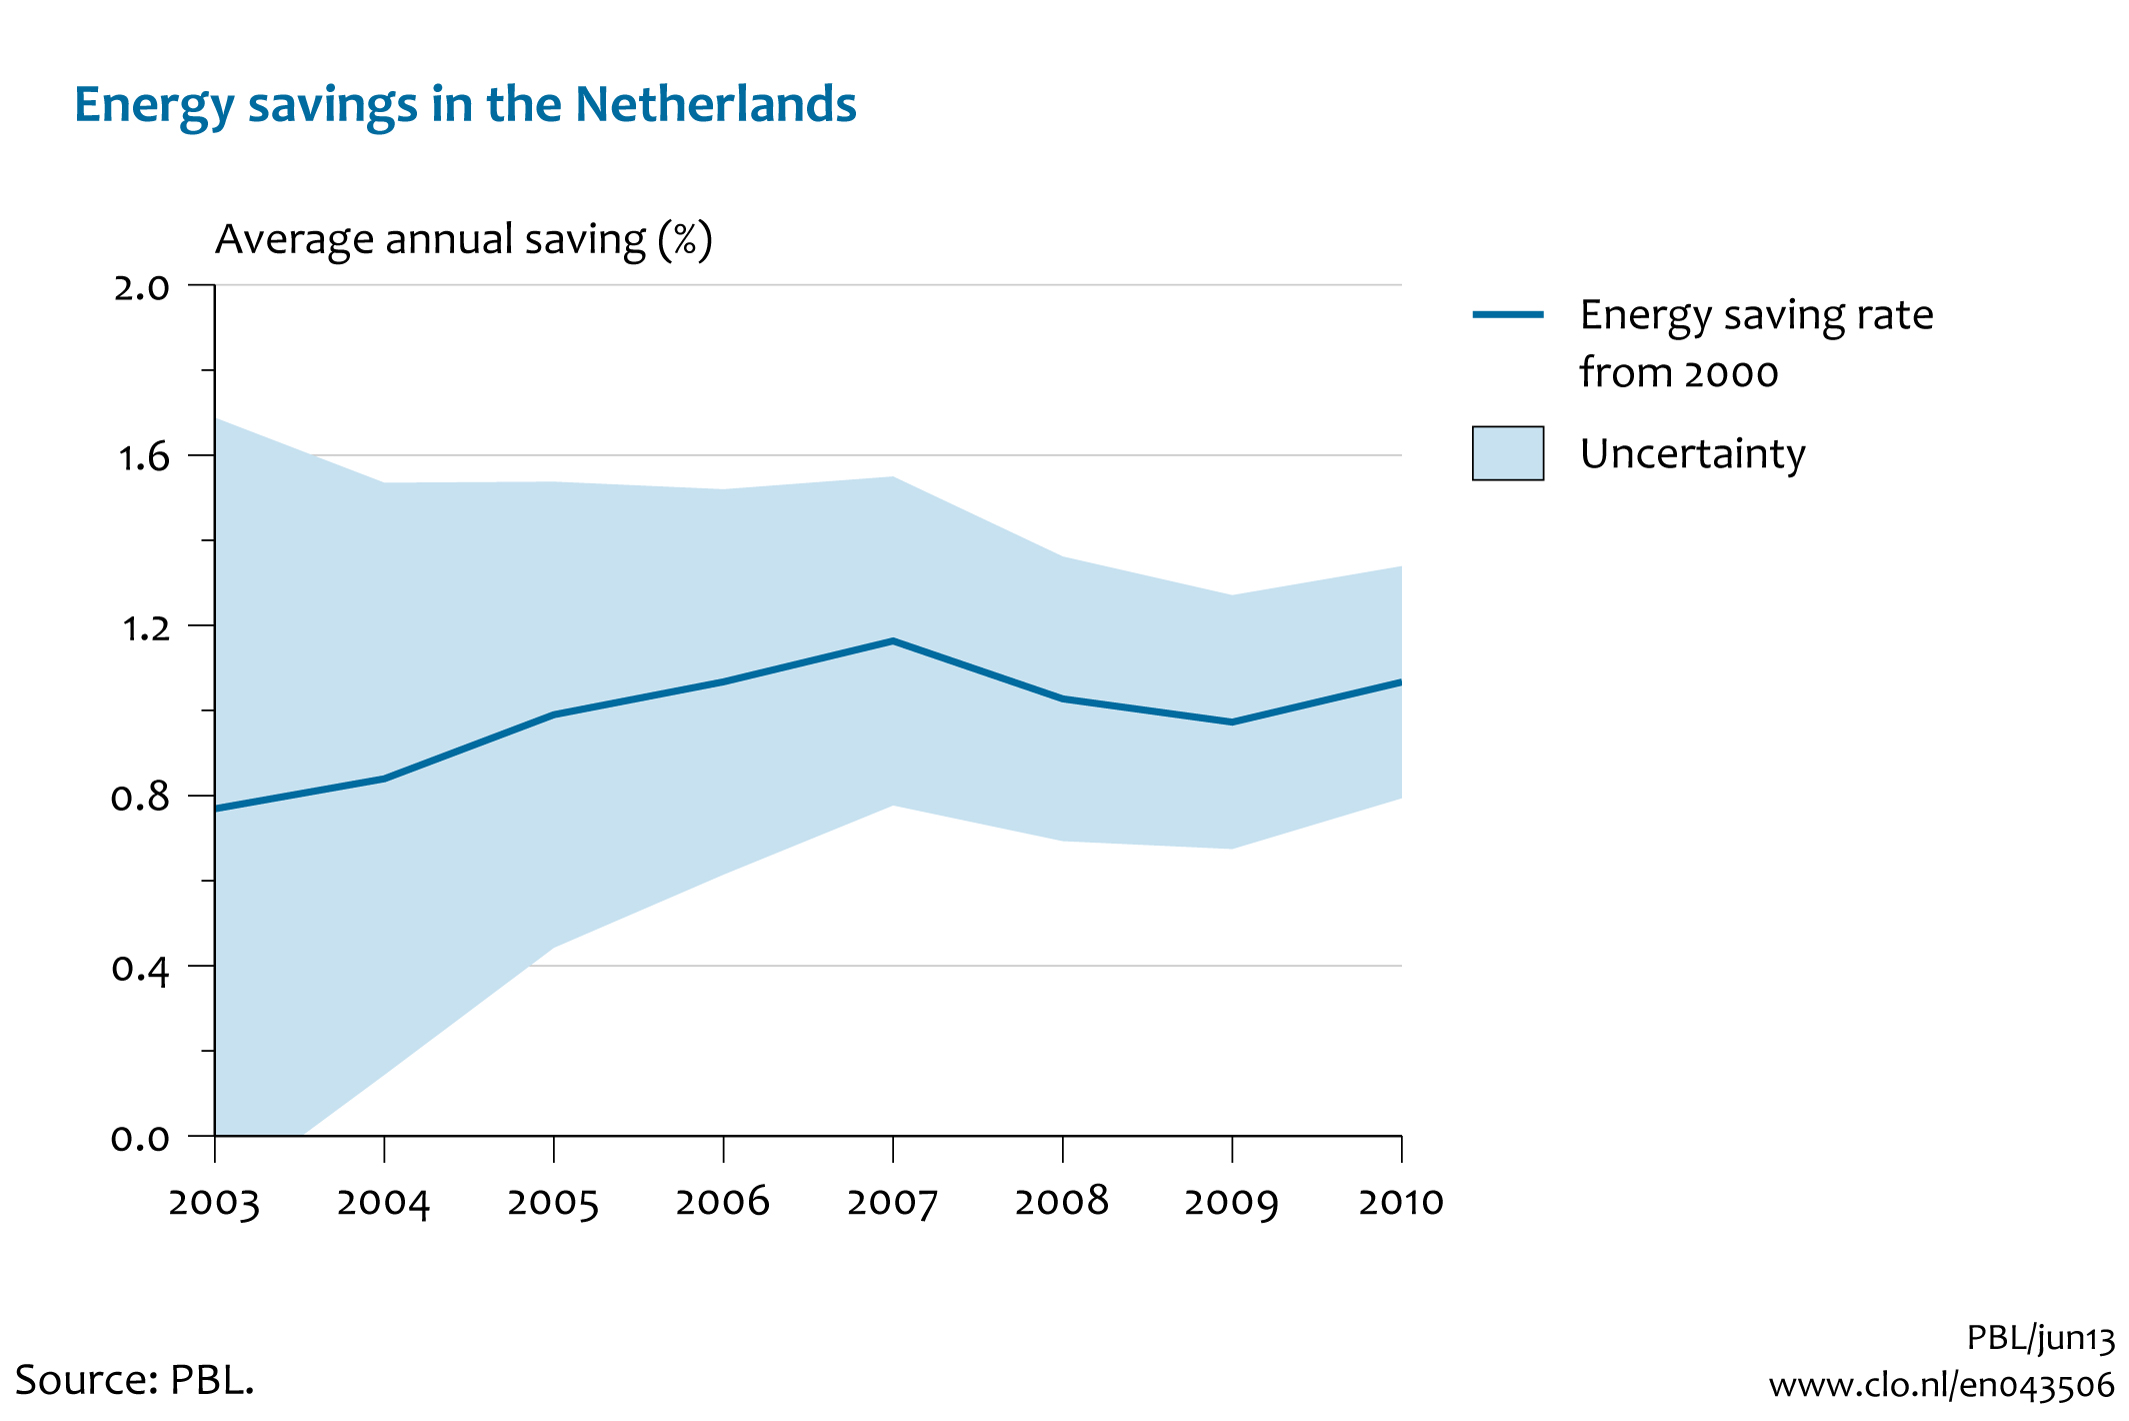 Image Energy savings in the Netherlands. The image is further explained in the text.